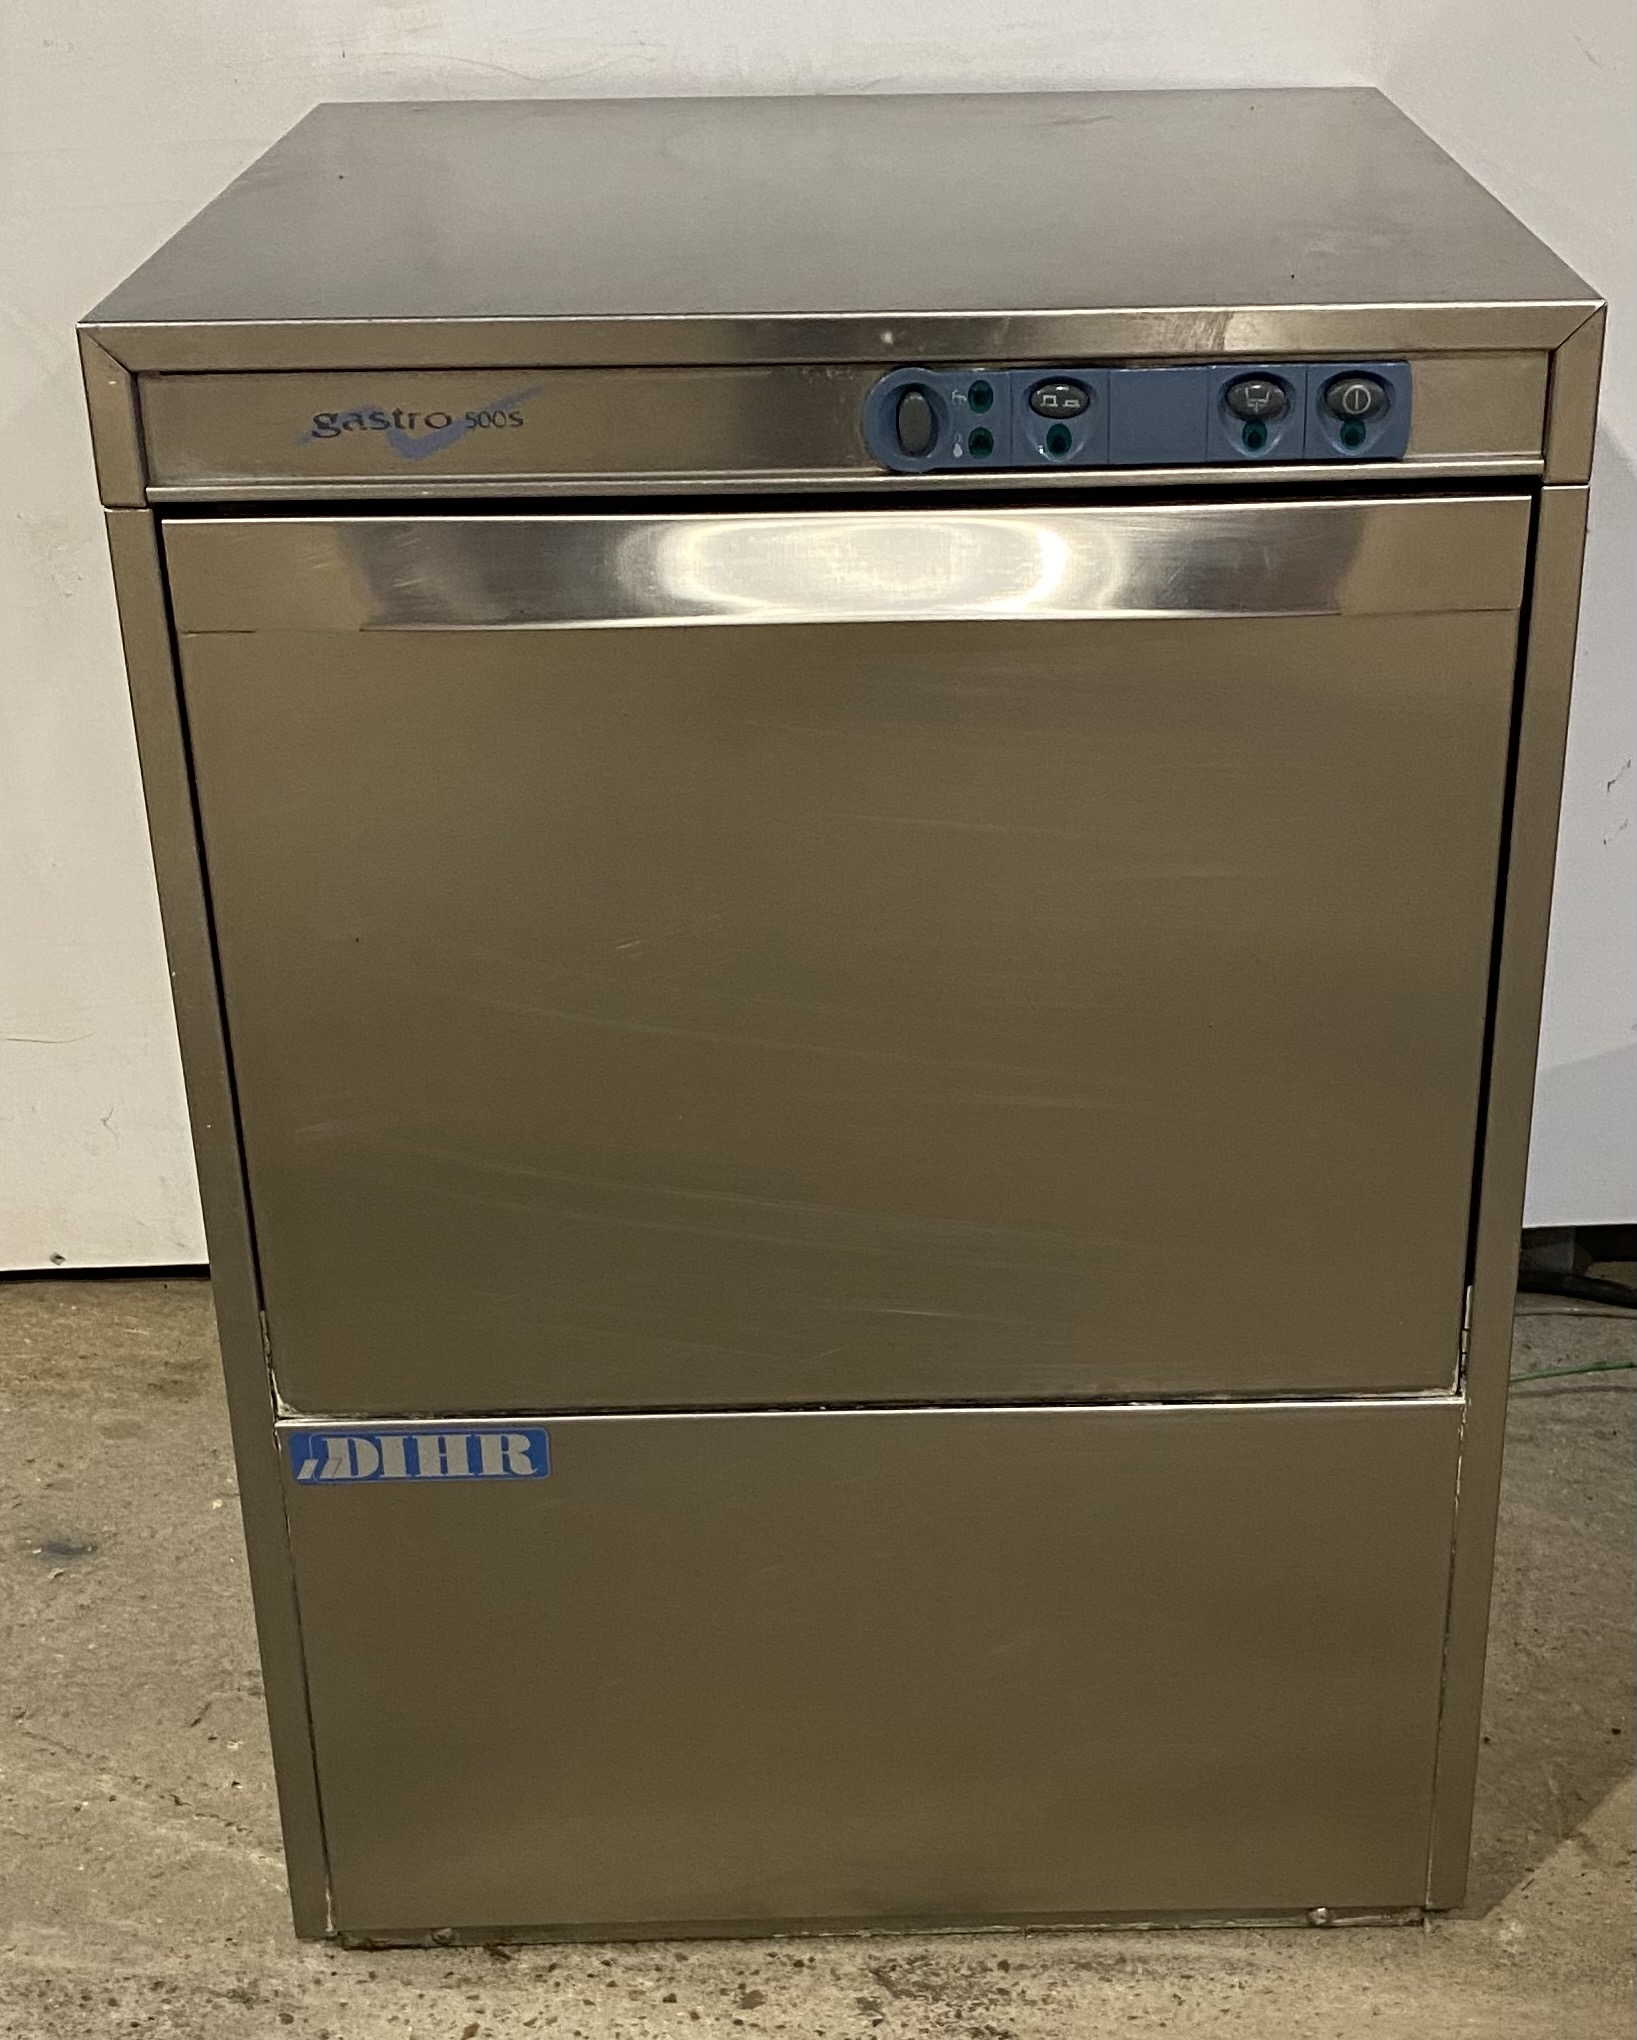 DIHR D500S Under Counter Dish Washer